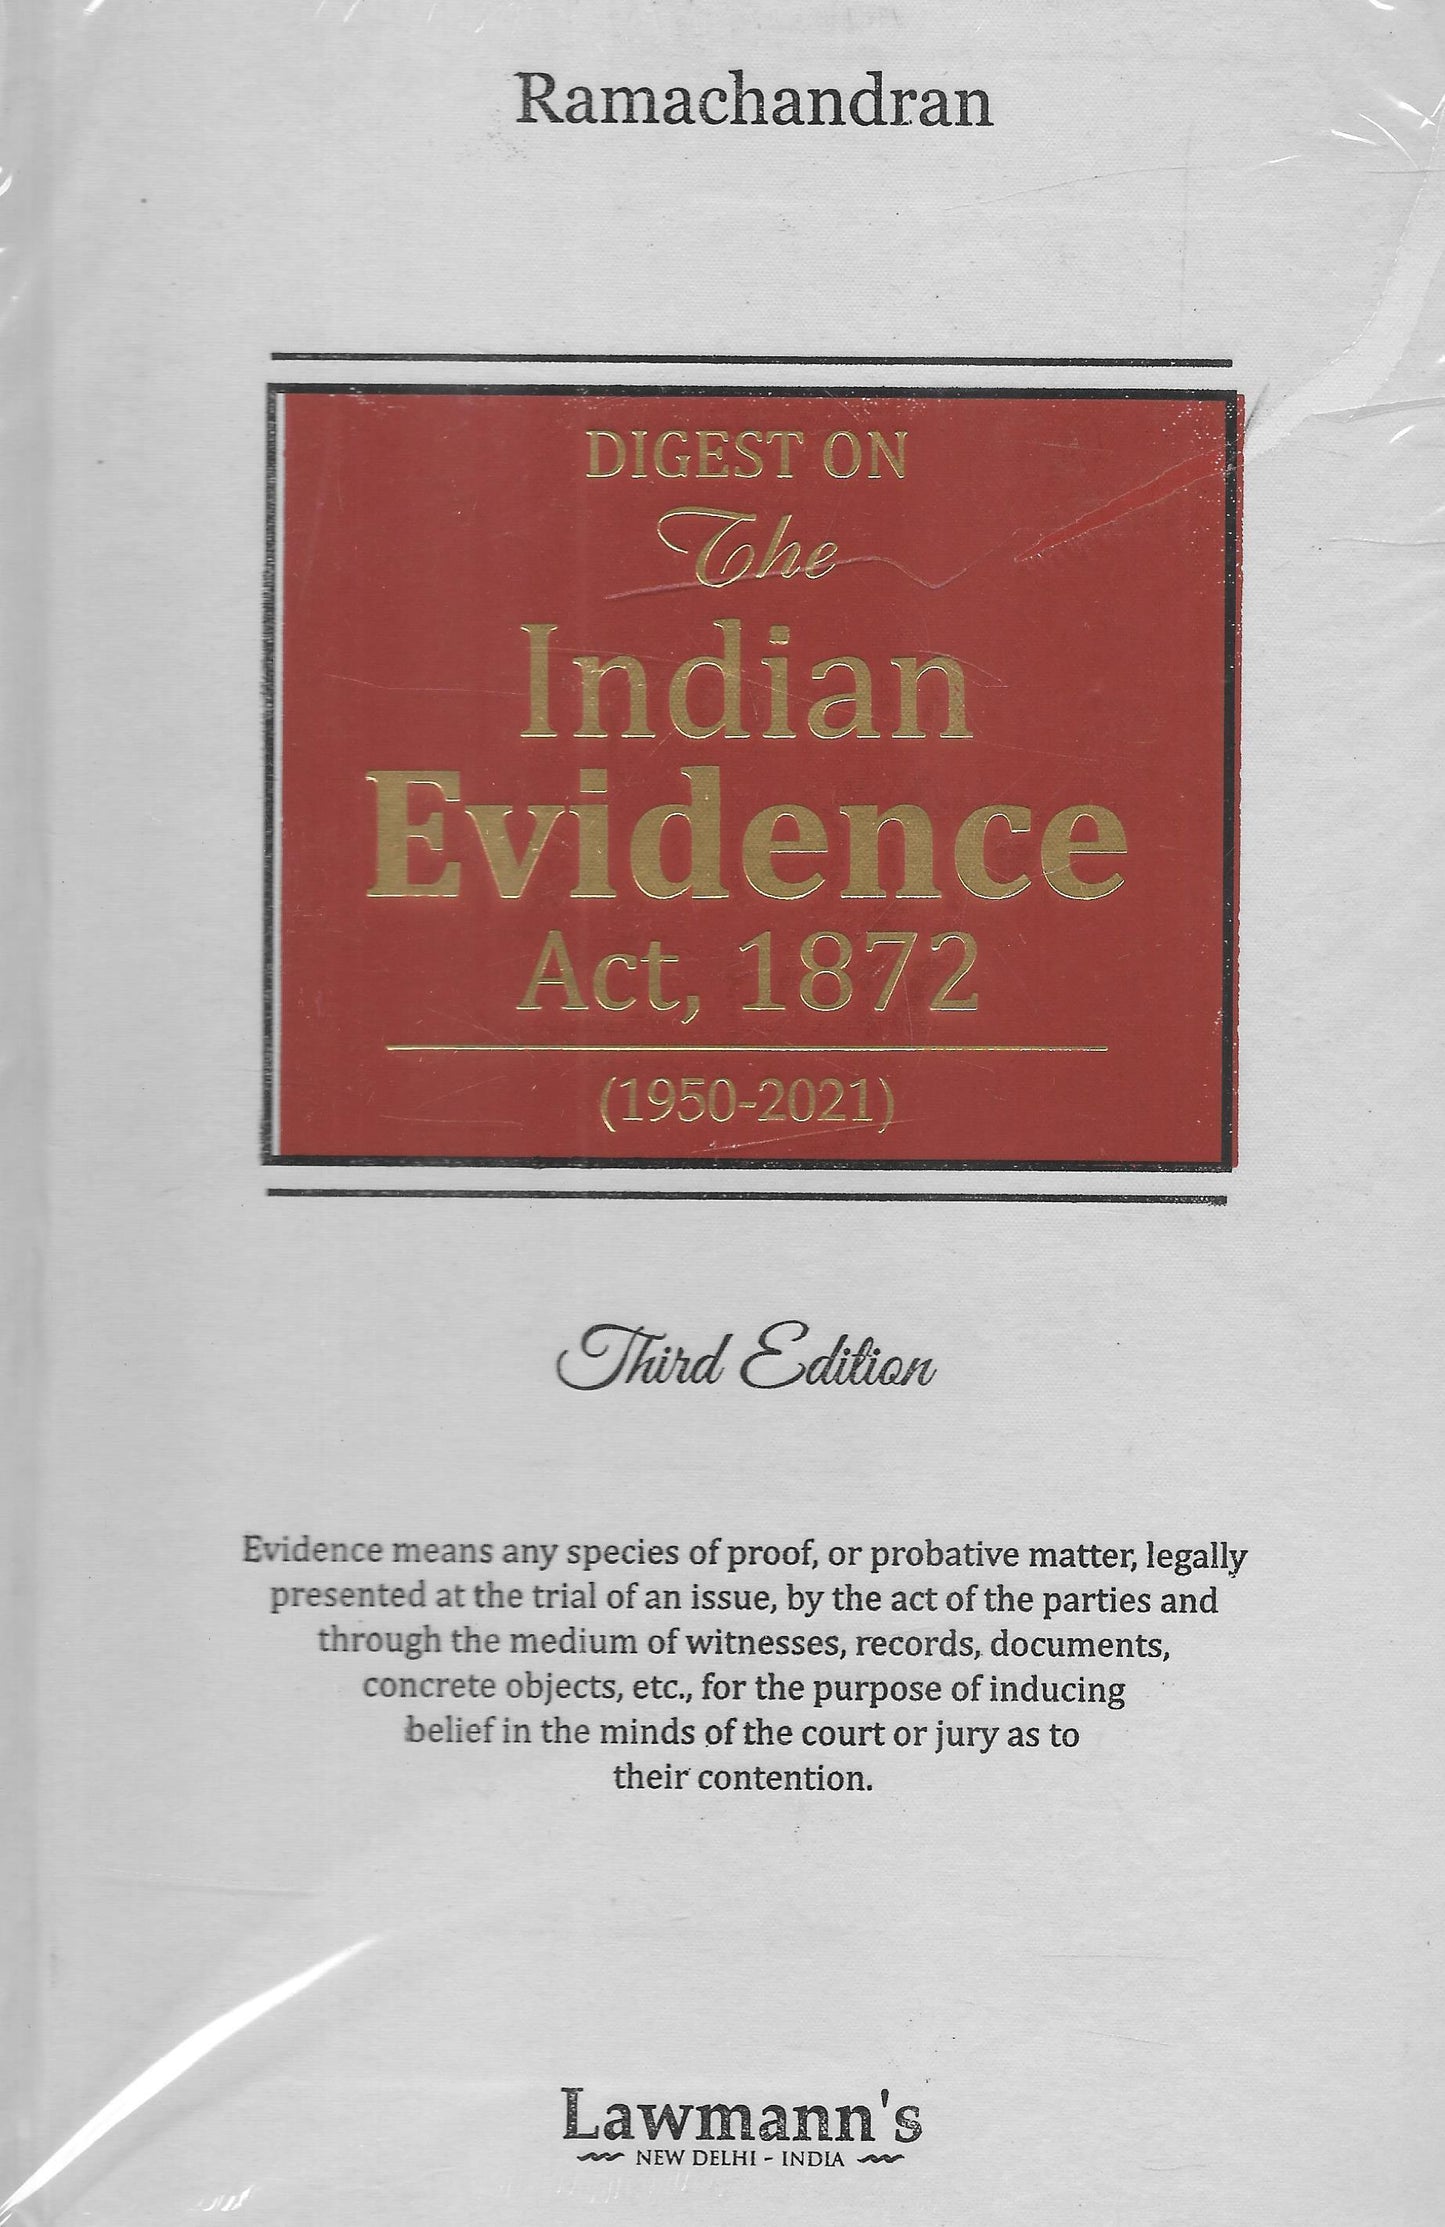 Digest on The Indian Evidence Act, 1872 (1950-2021) - M&J Services